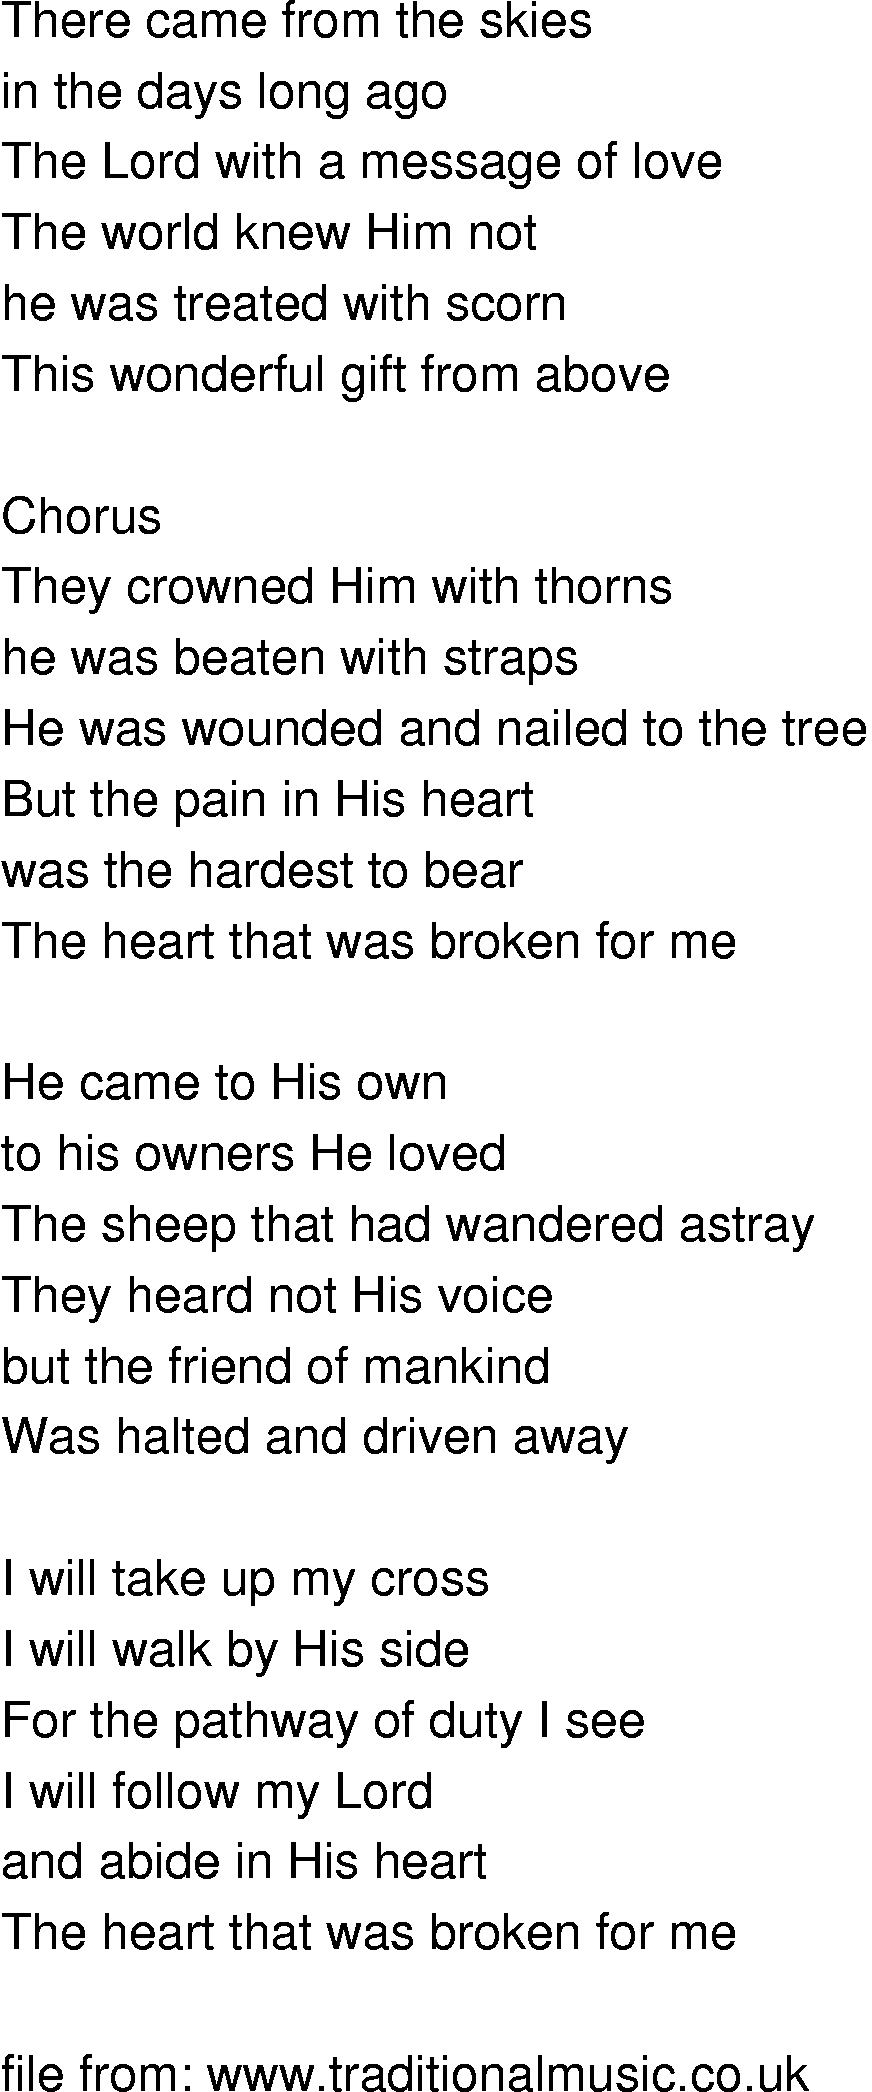 Old-Time (oldtimey) Song Lyrics - heart that was broken for me